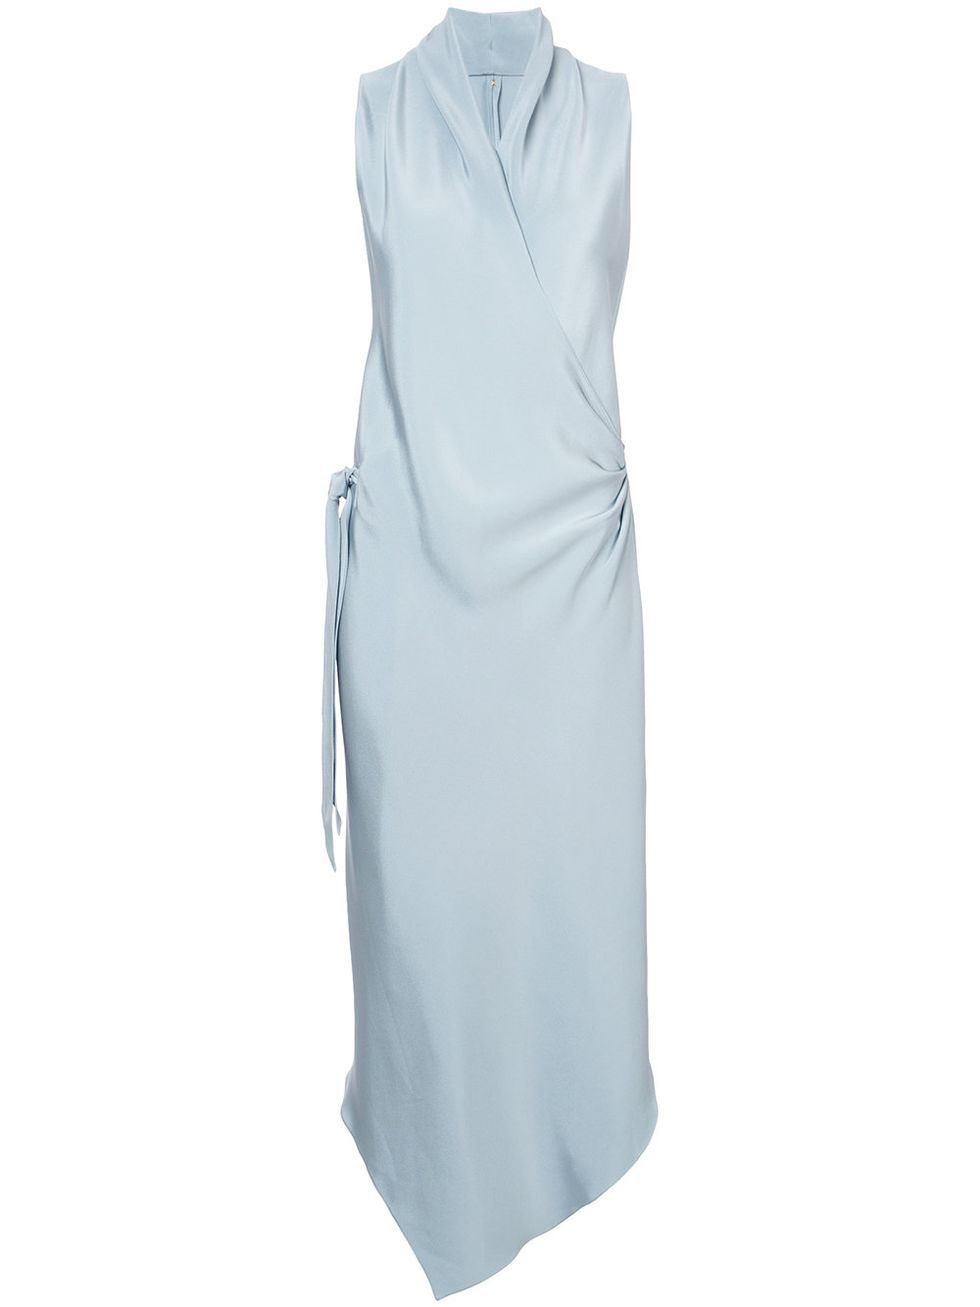 Clothing, White, Dress, Day dress, Turquoise, Aqua, Cocktail dress, Neck, Formal wear, Sleeve, 